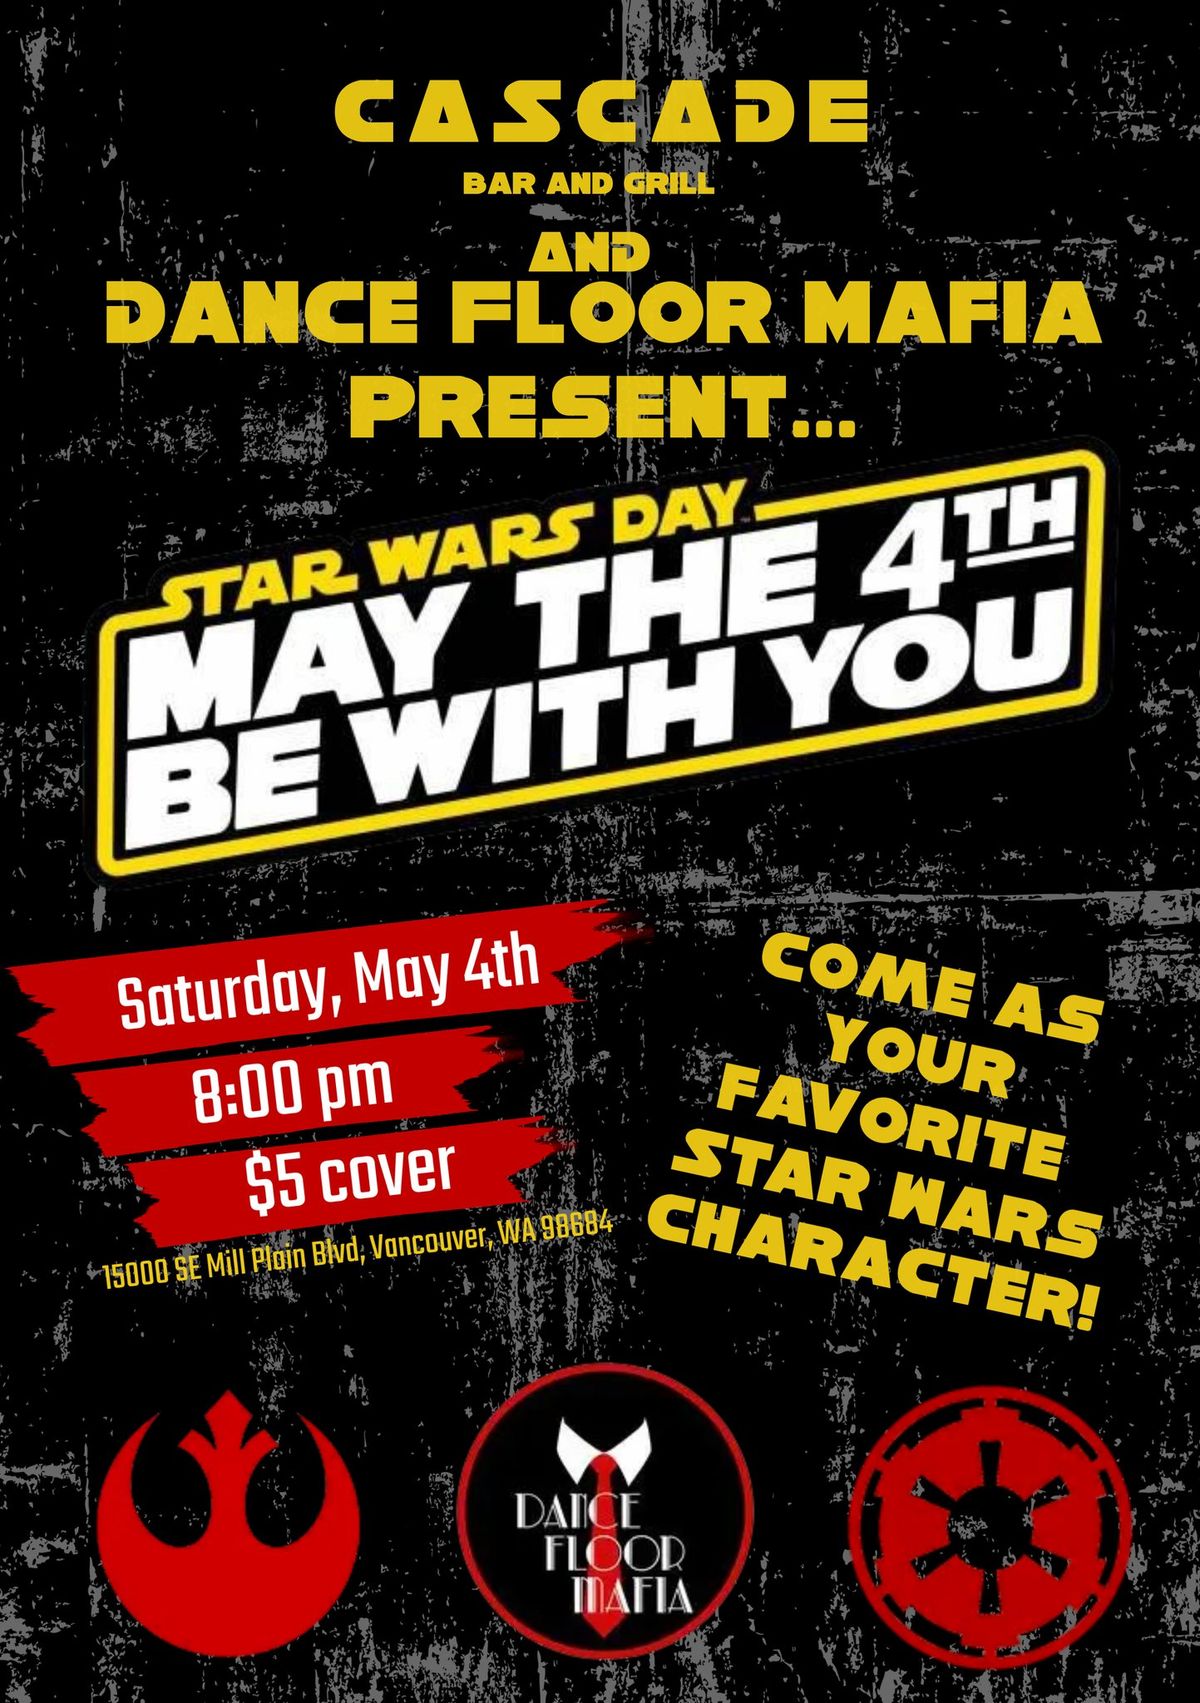 Dance Floor Mafia May the Fourth be With You.